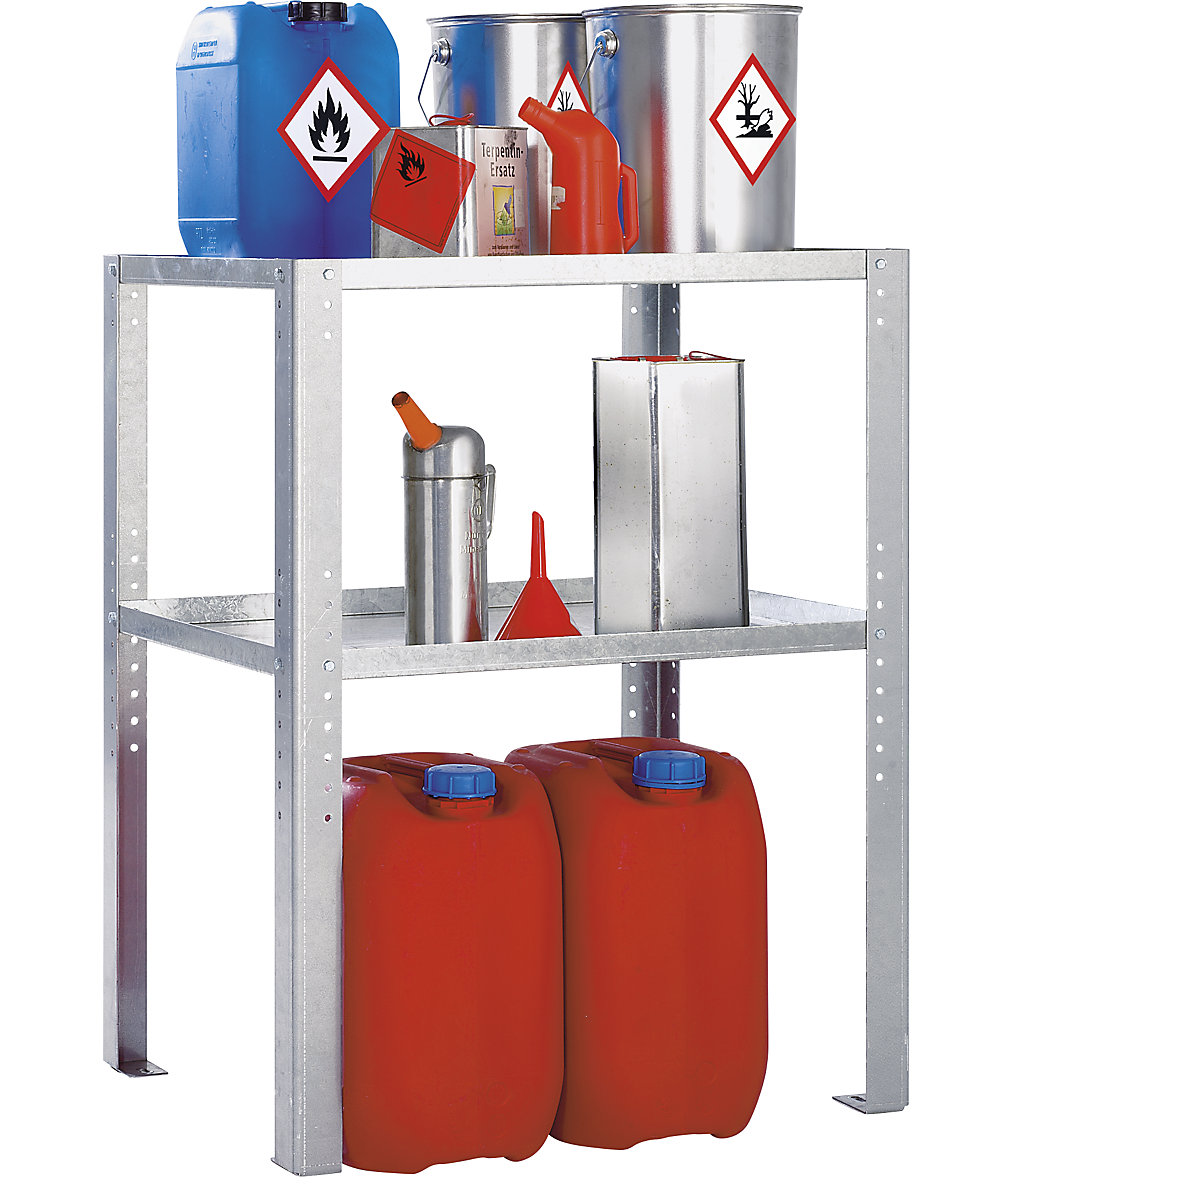 Drum and small container shelf unit - eurokraft pro